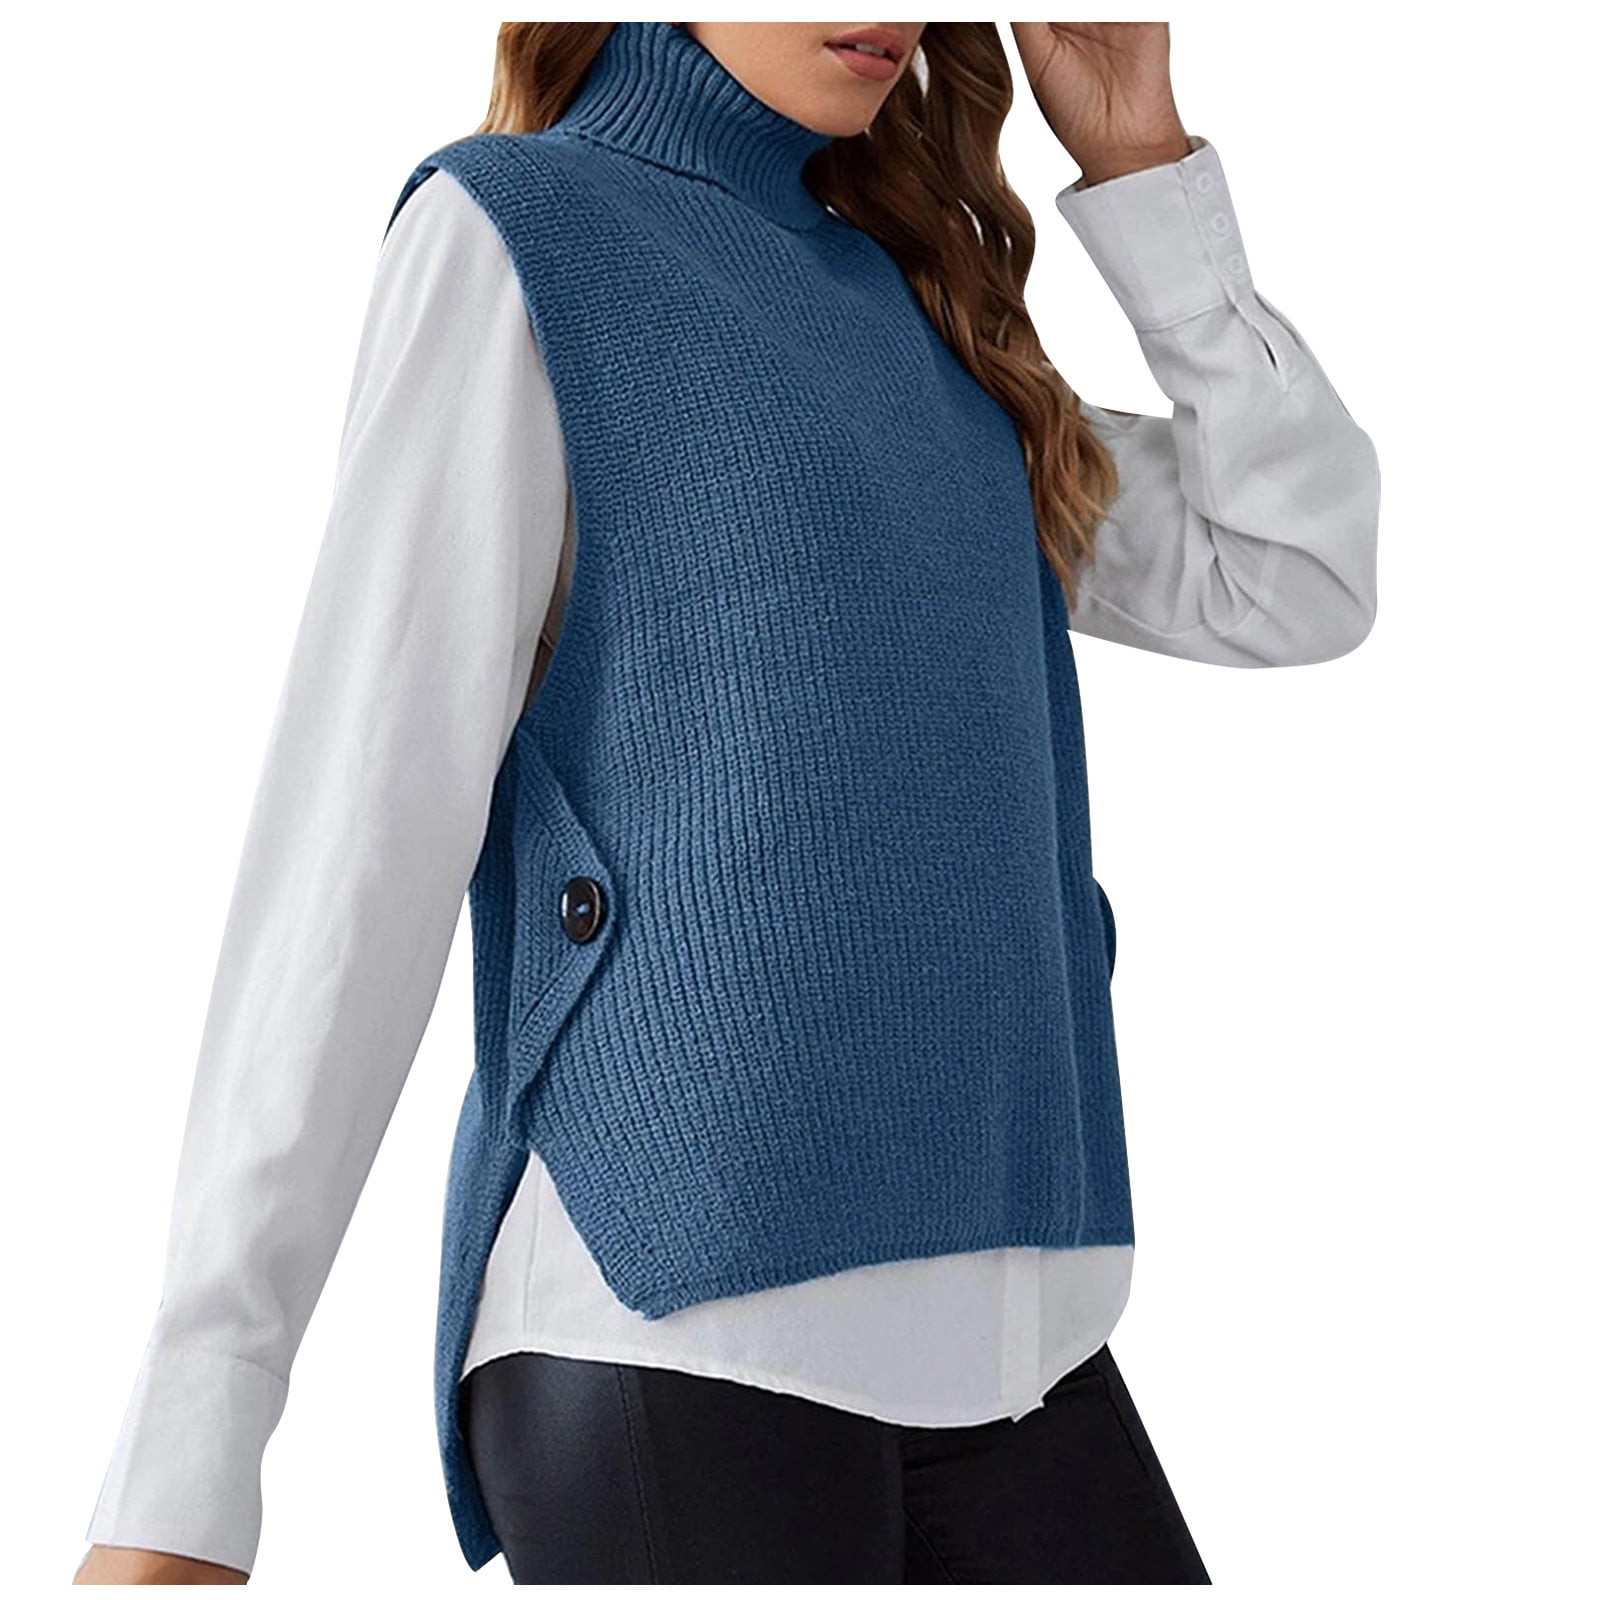 High neck vest knitted sweater women's sleeveless outer wear solid color  knitted vest sweater vest top Women Knitted Long Pullover Sleeveless Casual  Sweater Autumn Winter Tops - Walmart.com